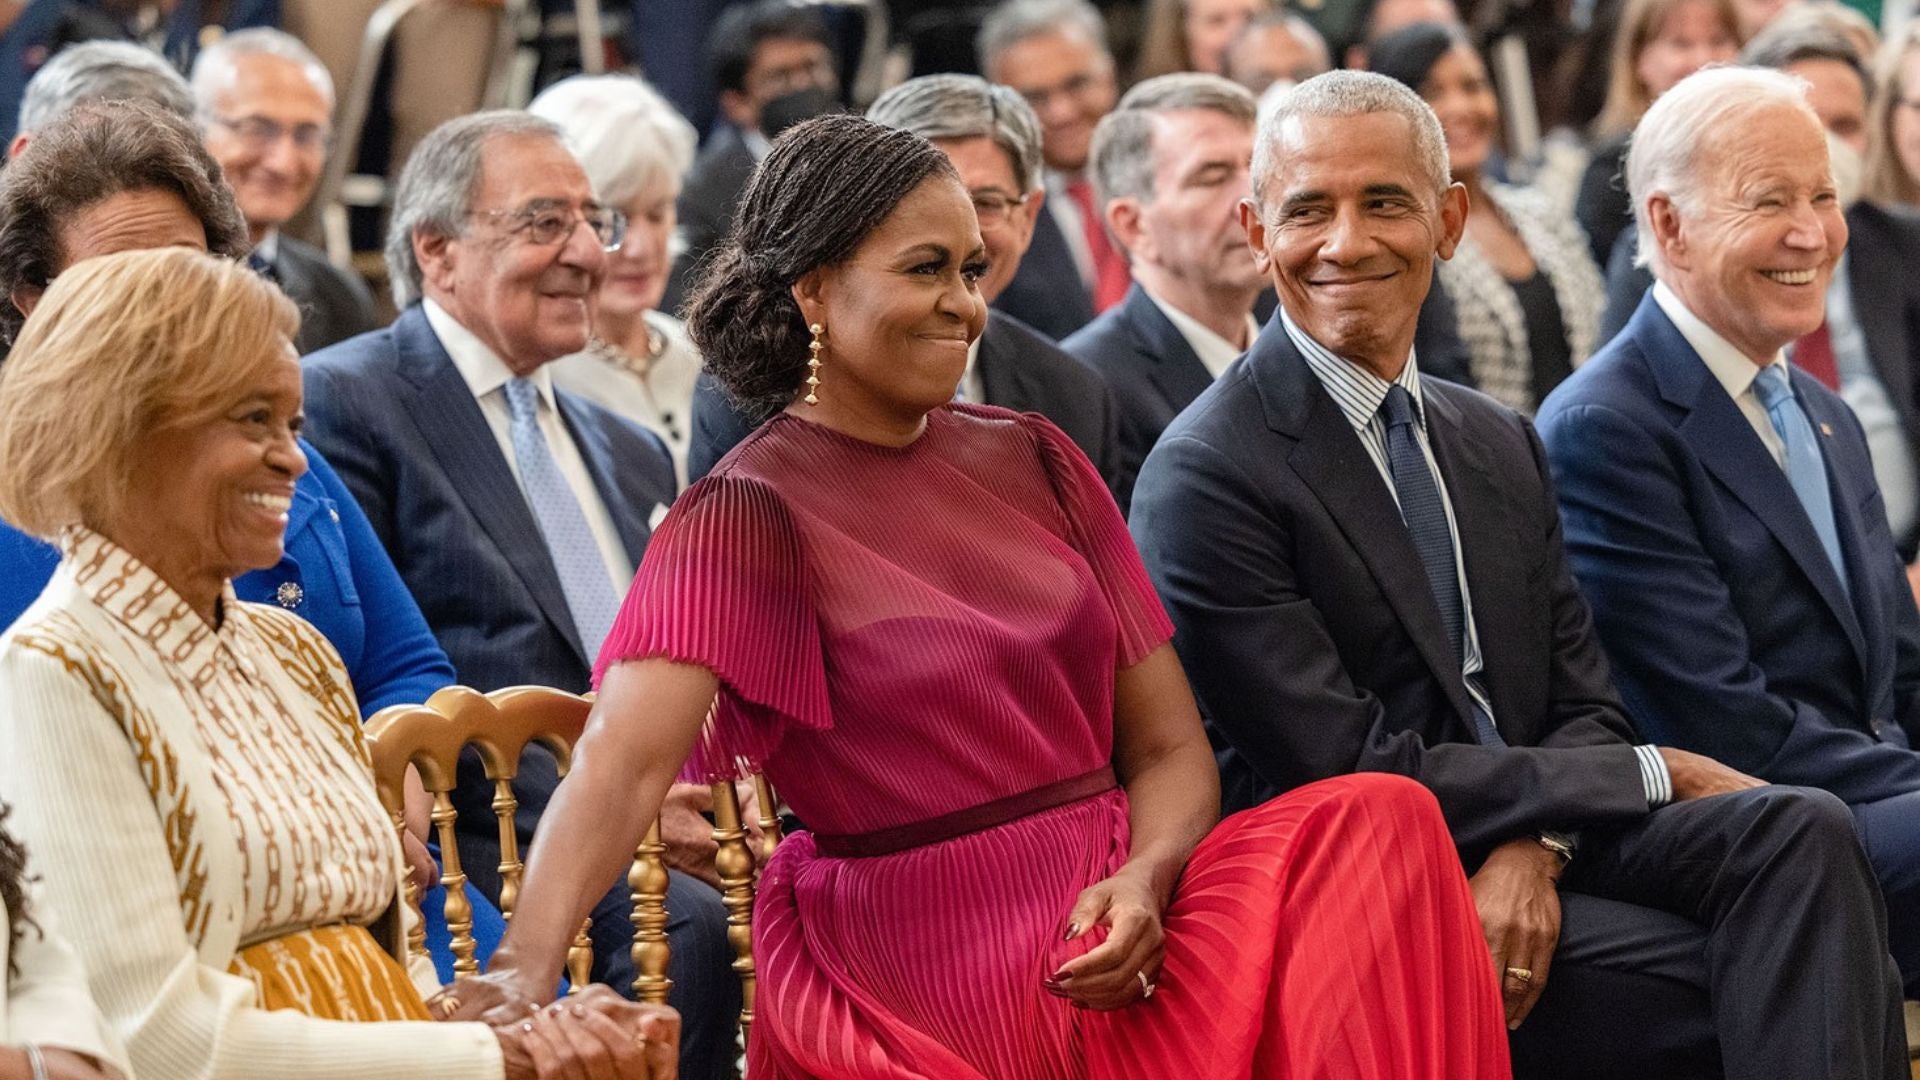 Michelle Obama’s Knotless Braids Proves Why She’s the First Lady of Style and Substance